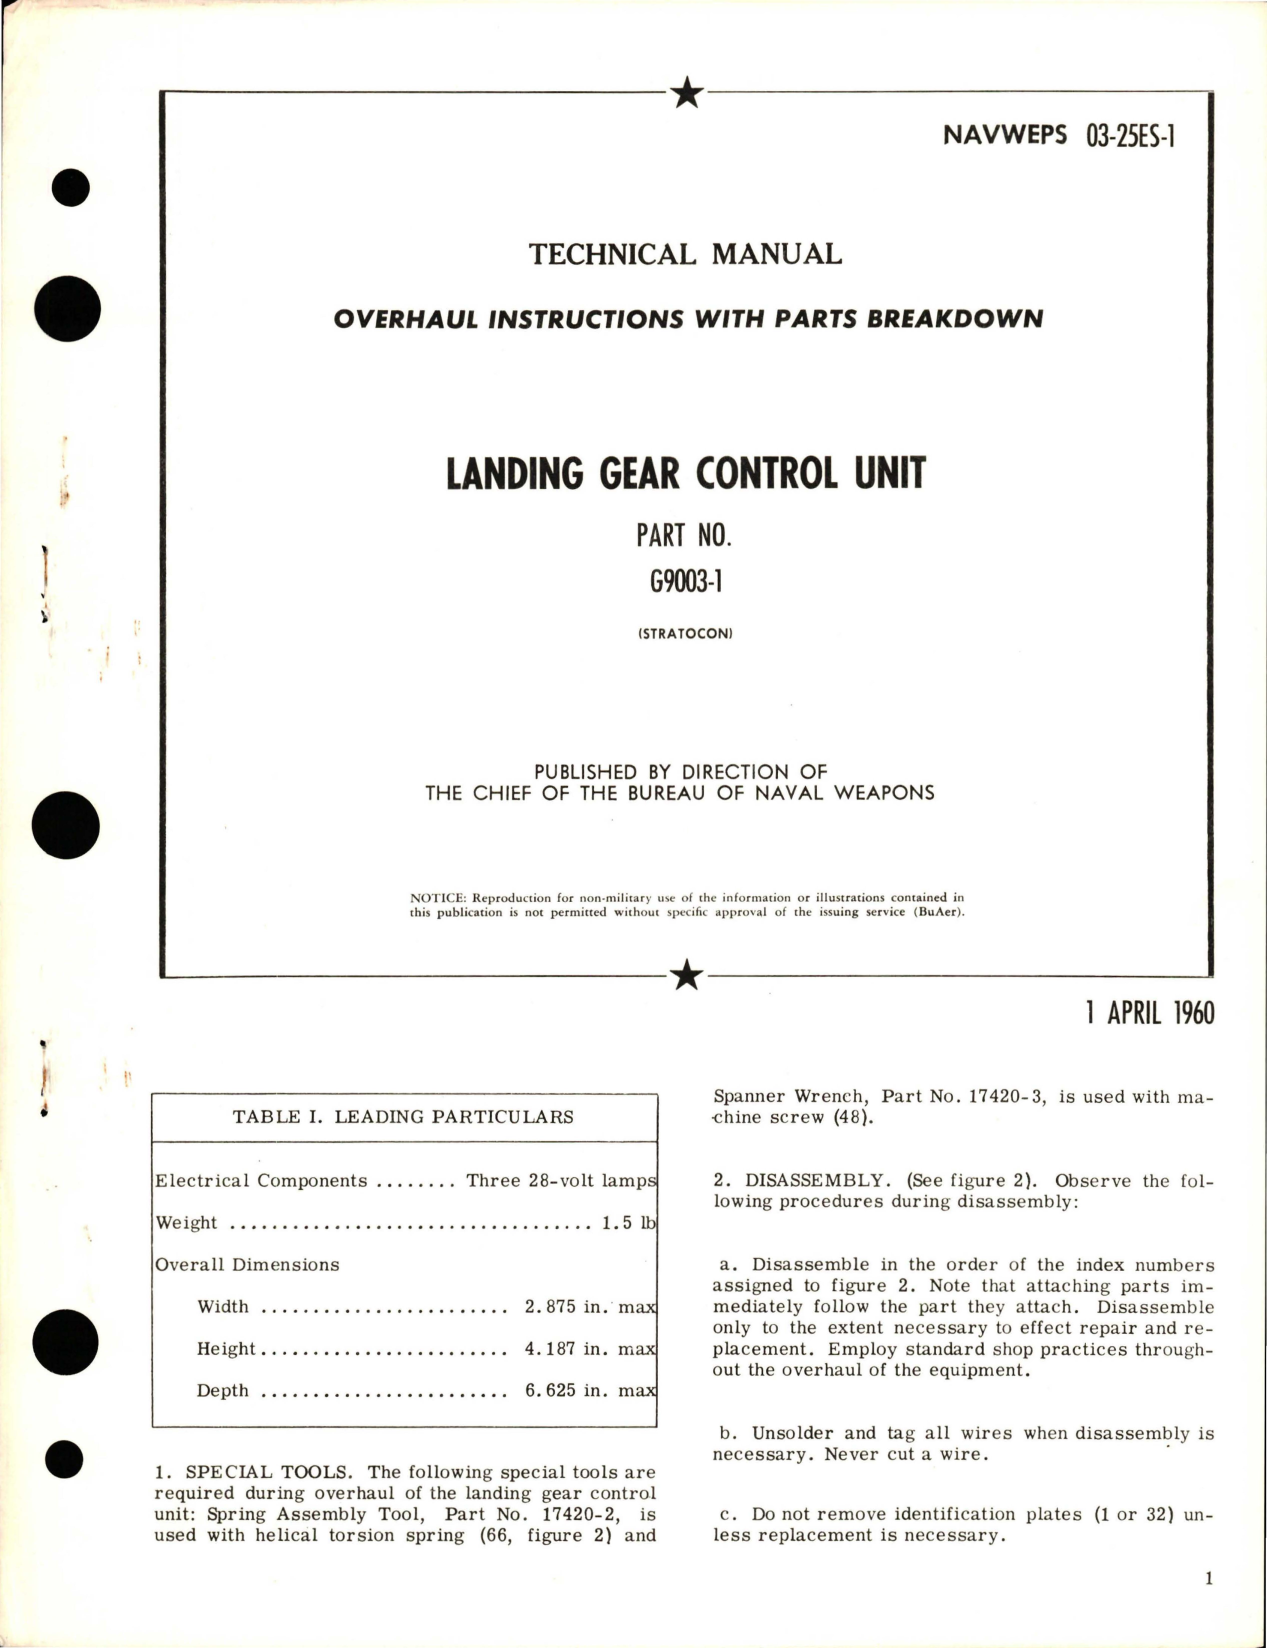 Sample page 1 from AirCorps Library document: Overhaul Instructions with Parts Breakdown for Landing Gear Control Unit - Part G9003-1